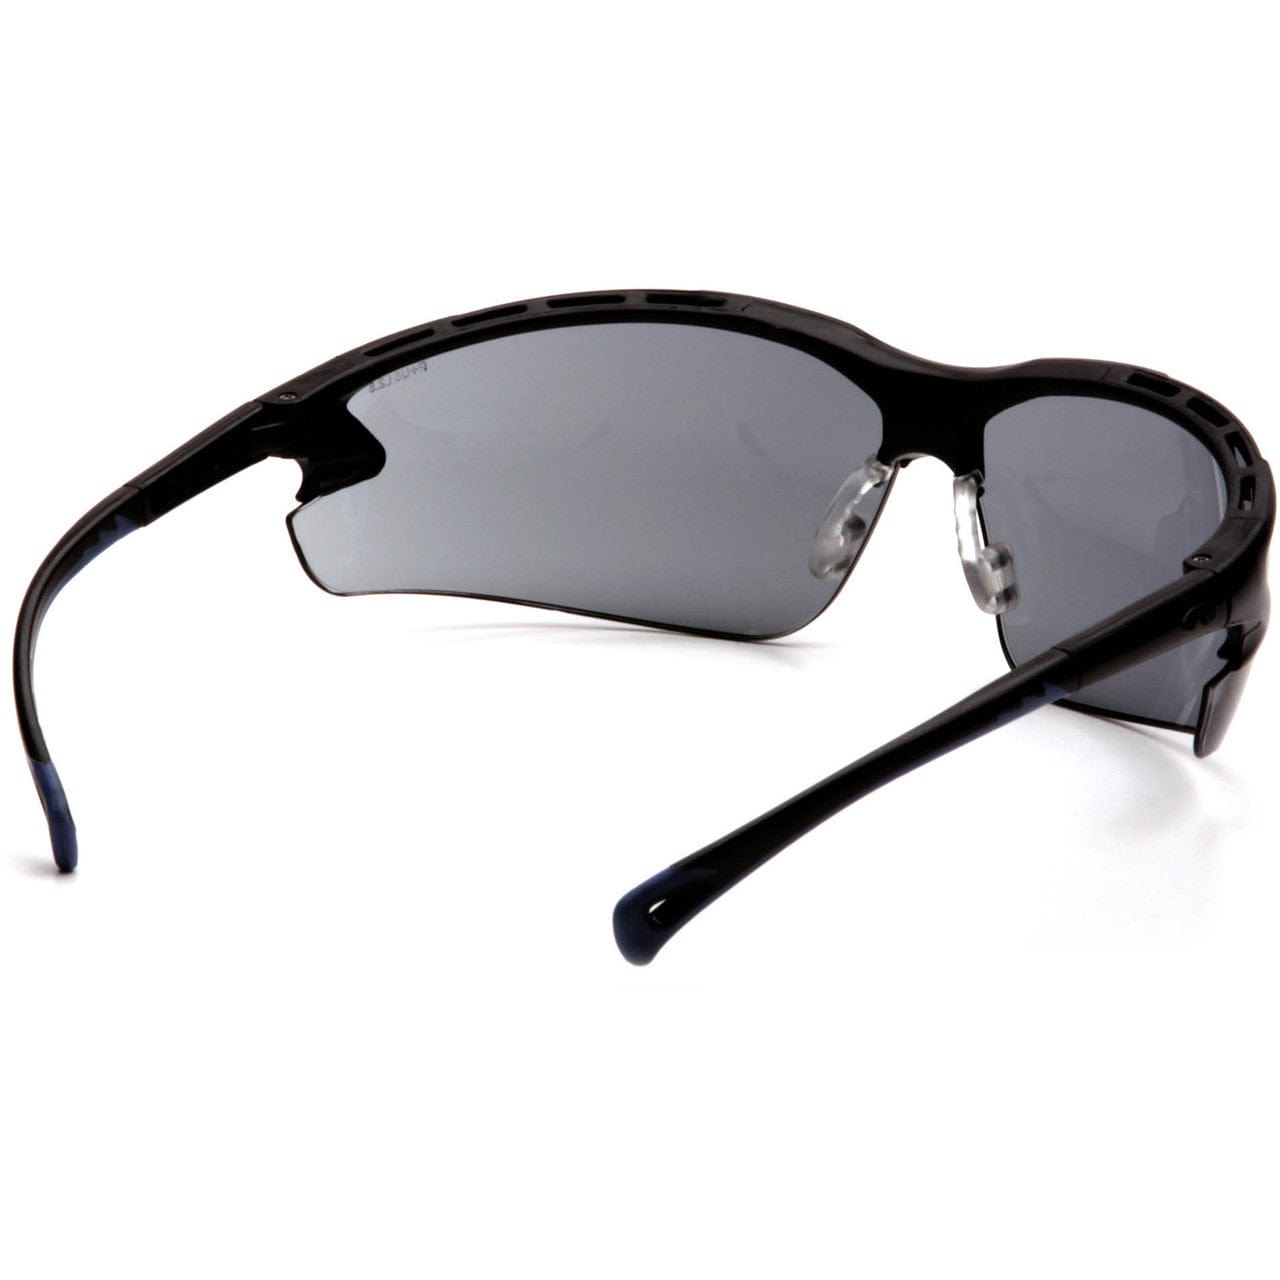 Pyramex Venture 3 Safety Glasses with Black Frame and Gray Anti-Fog Lens SB5720DT Inside View